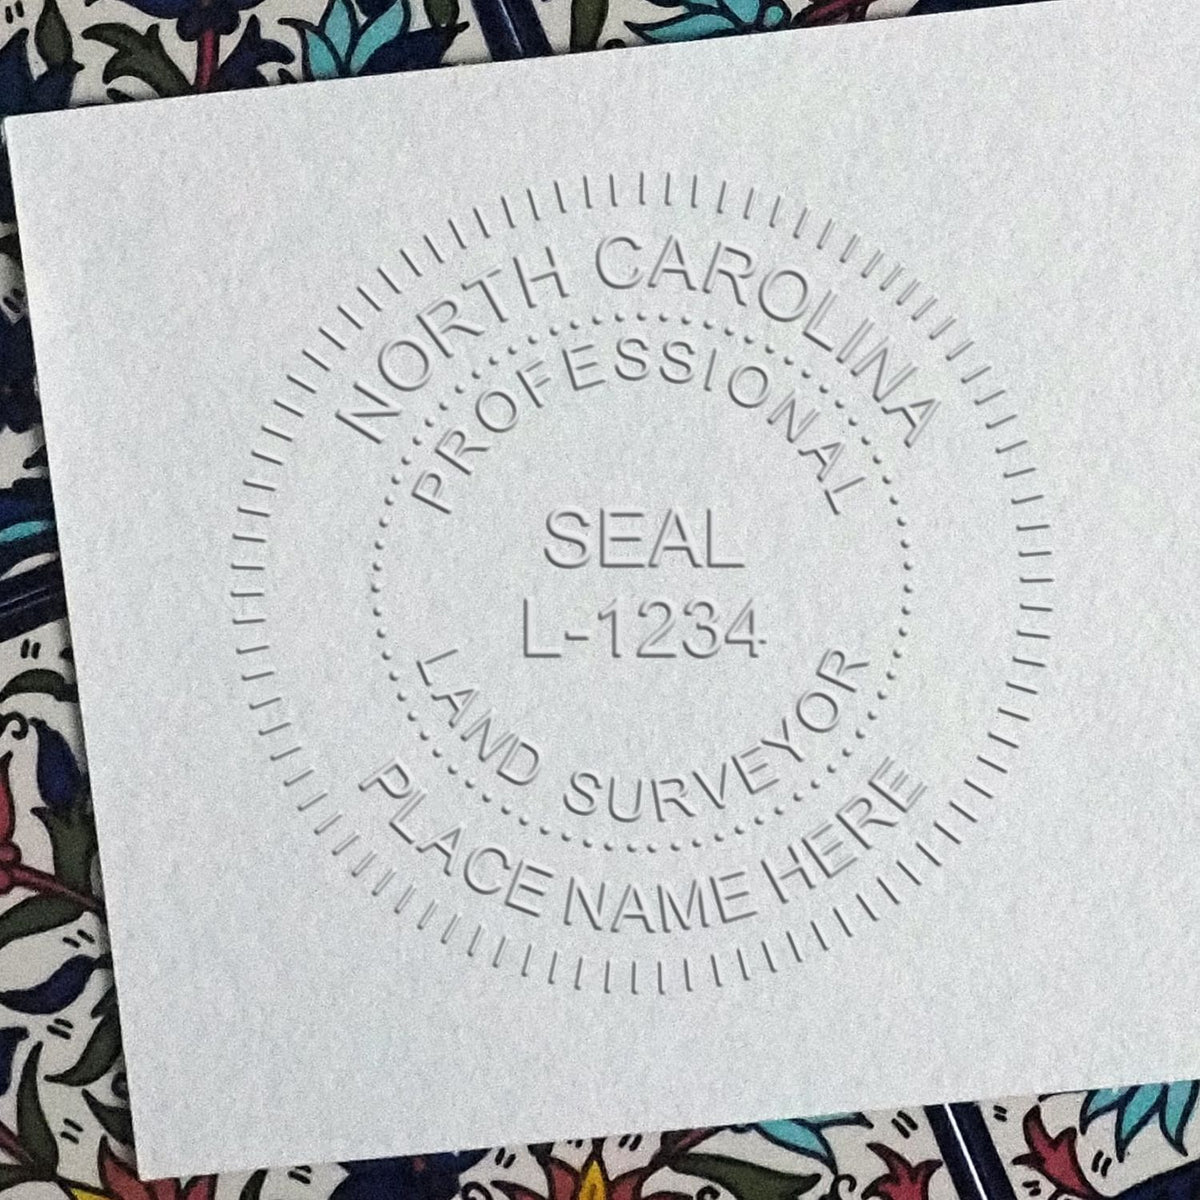 The Gift North Carolina Land Surveyor Seal stamp impression comes to life with a crisp, detailed image stamped on paper - showcasing true professional quality.